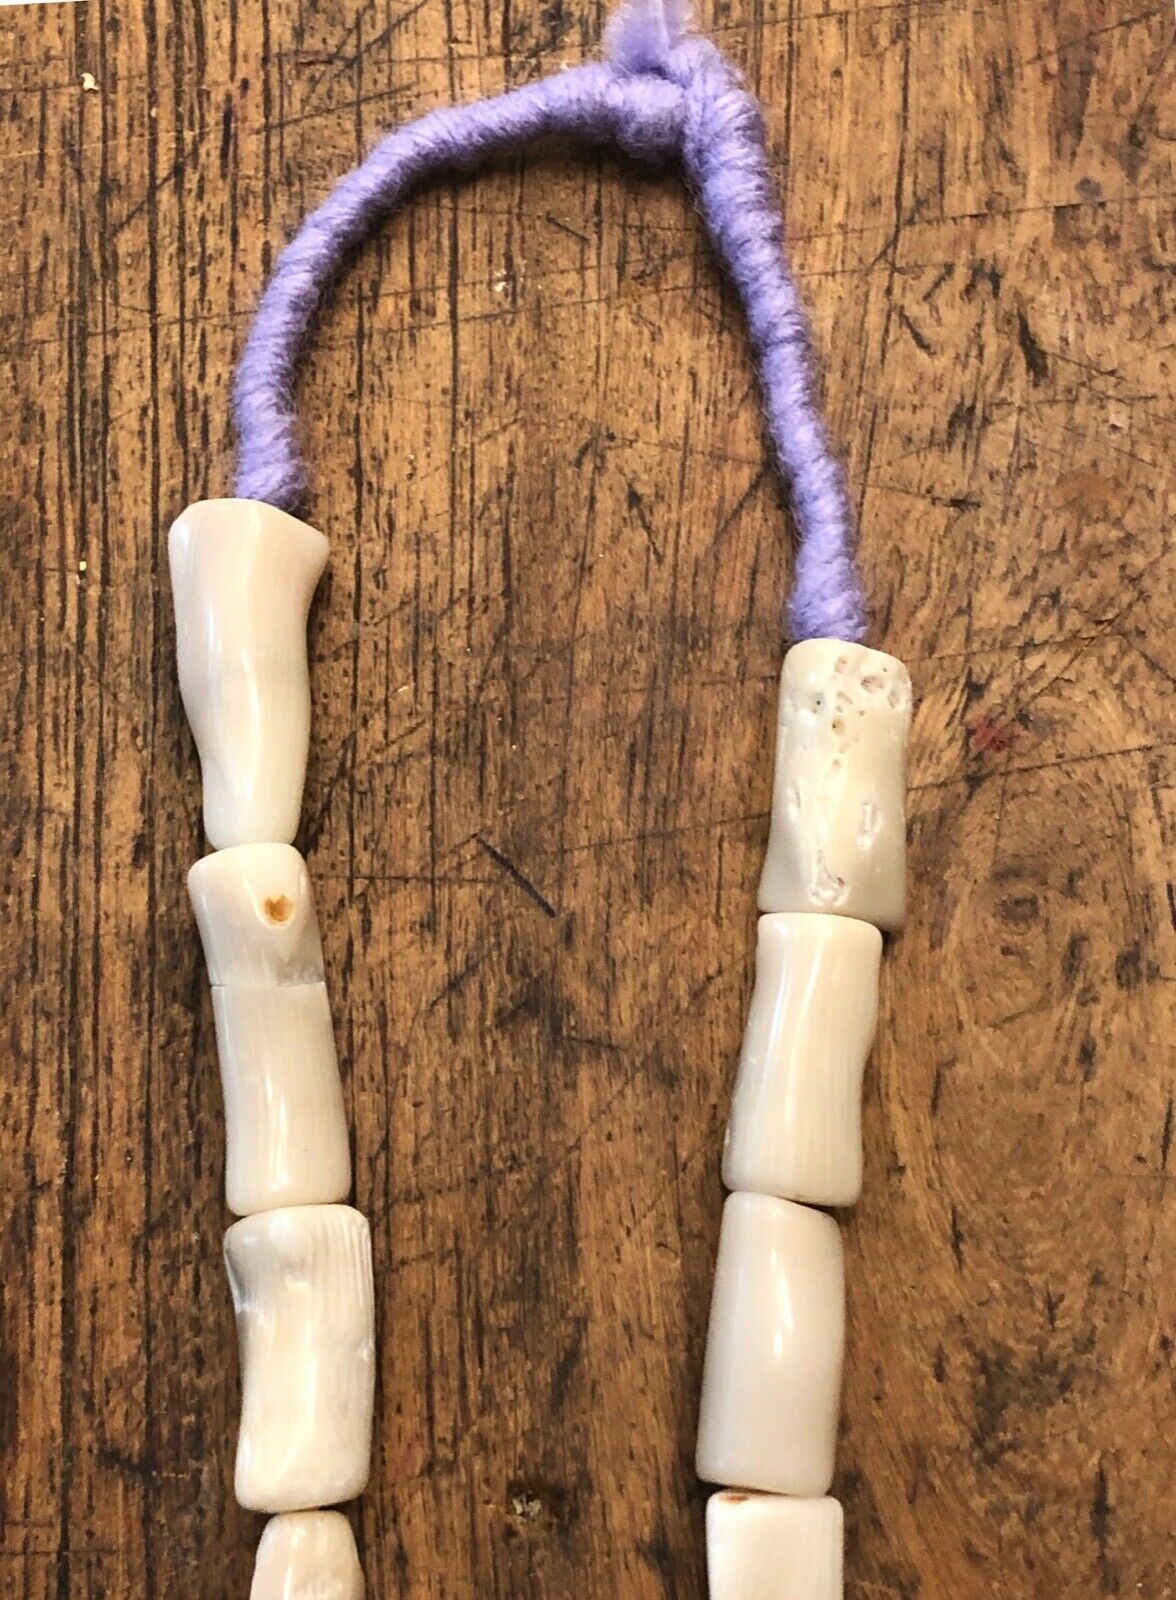 Superb Trade African Natural white Coral 32 Beads